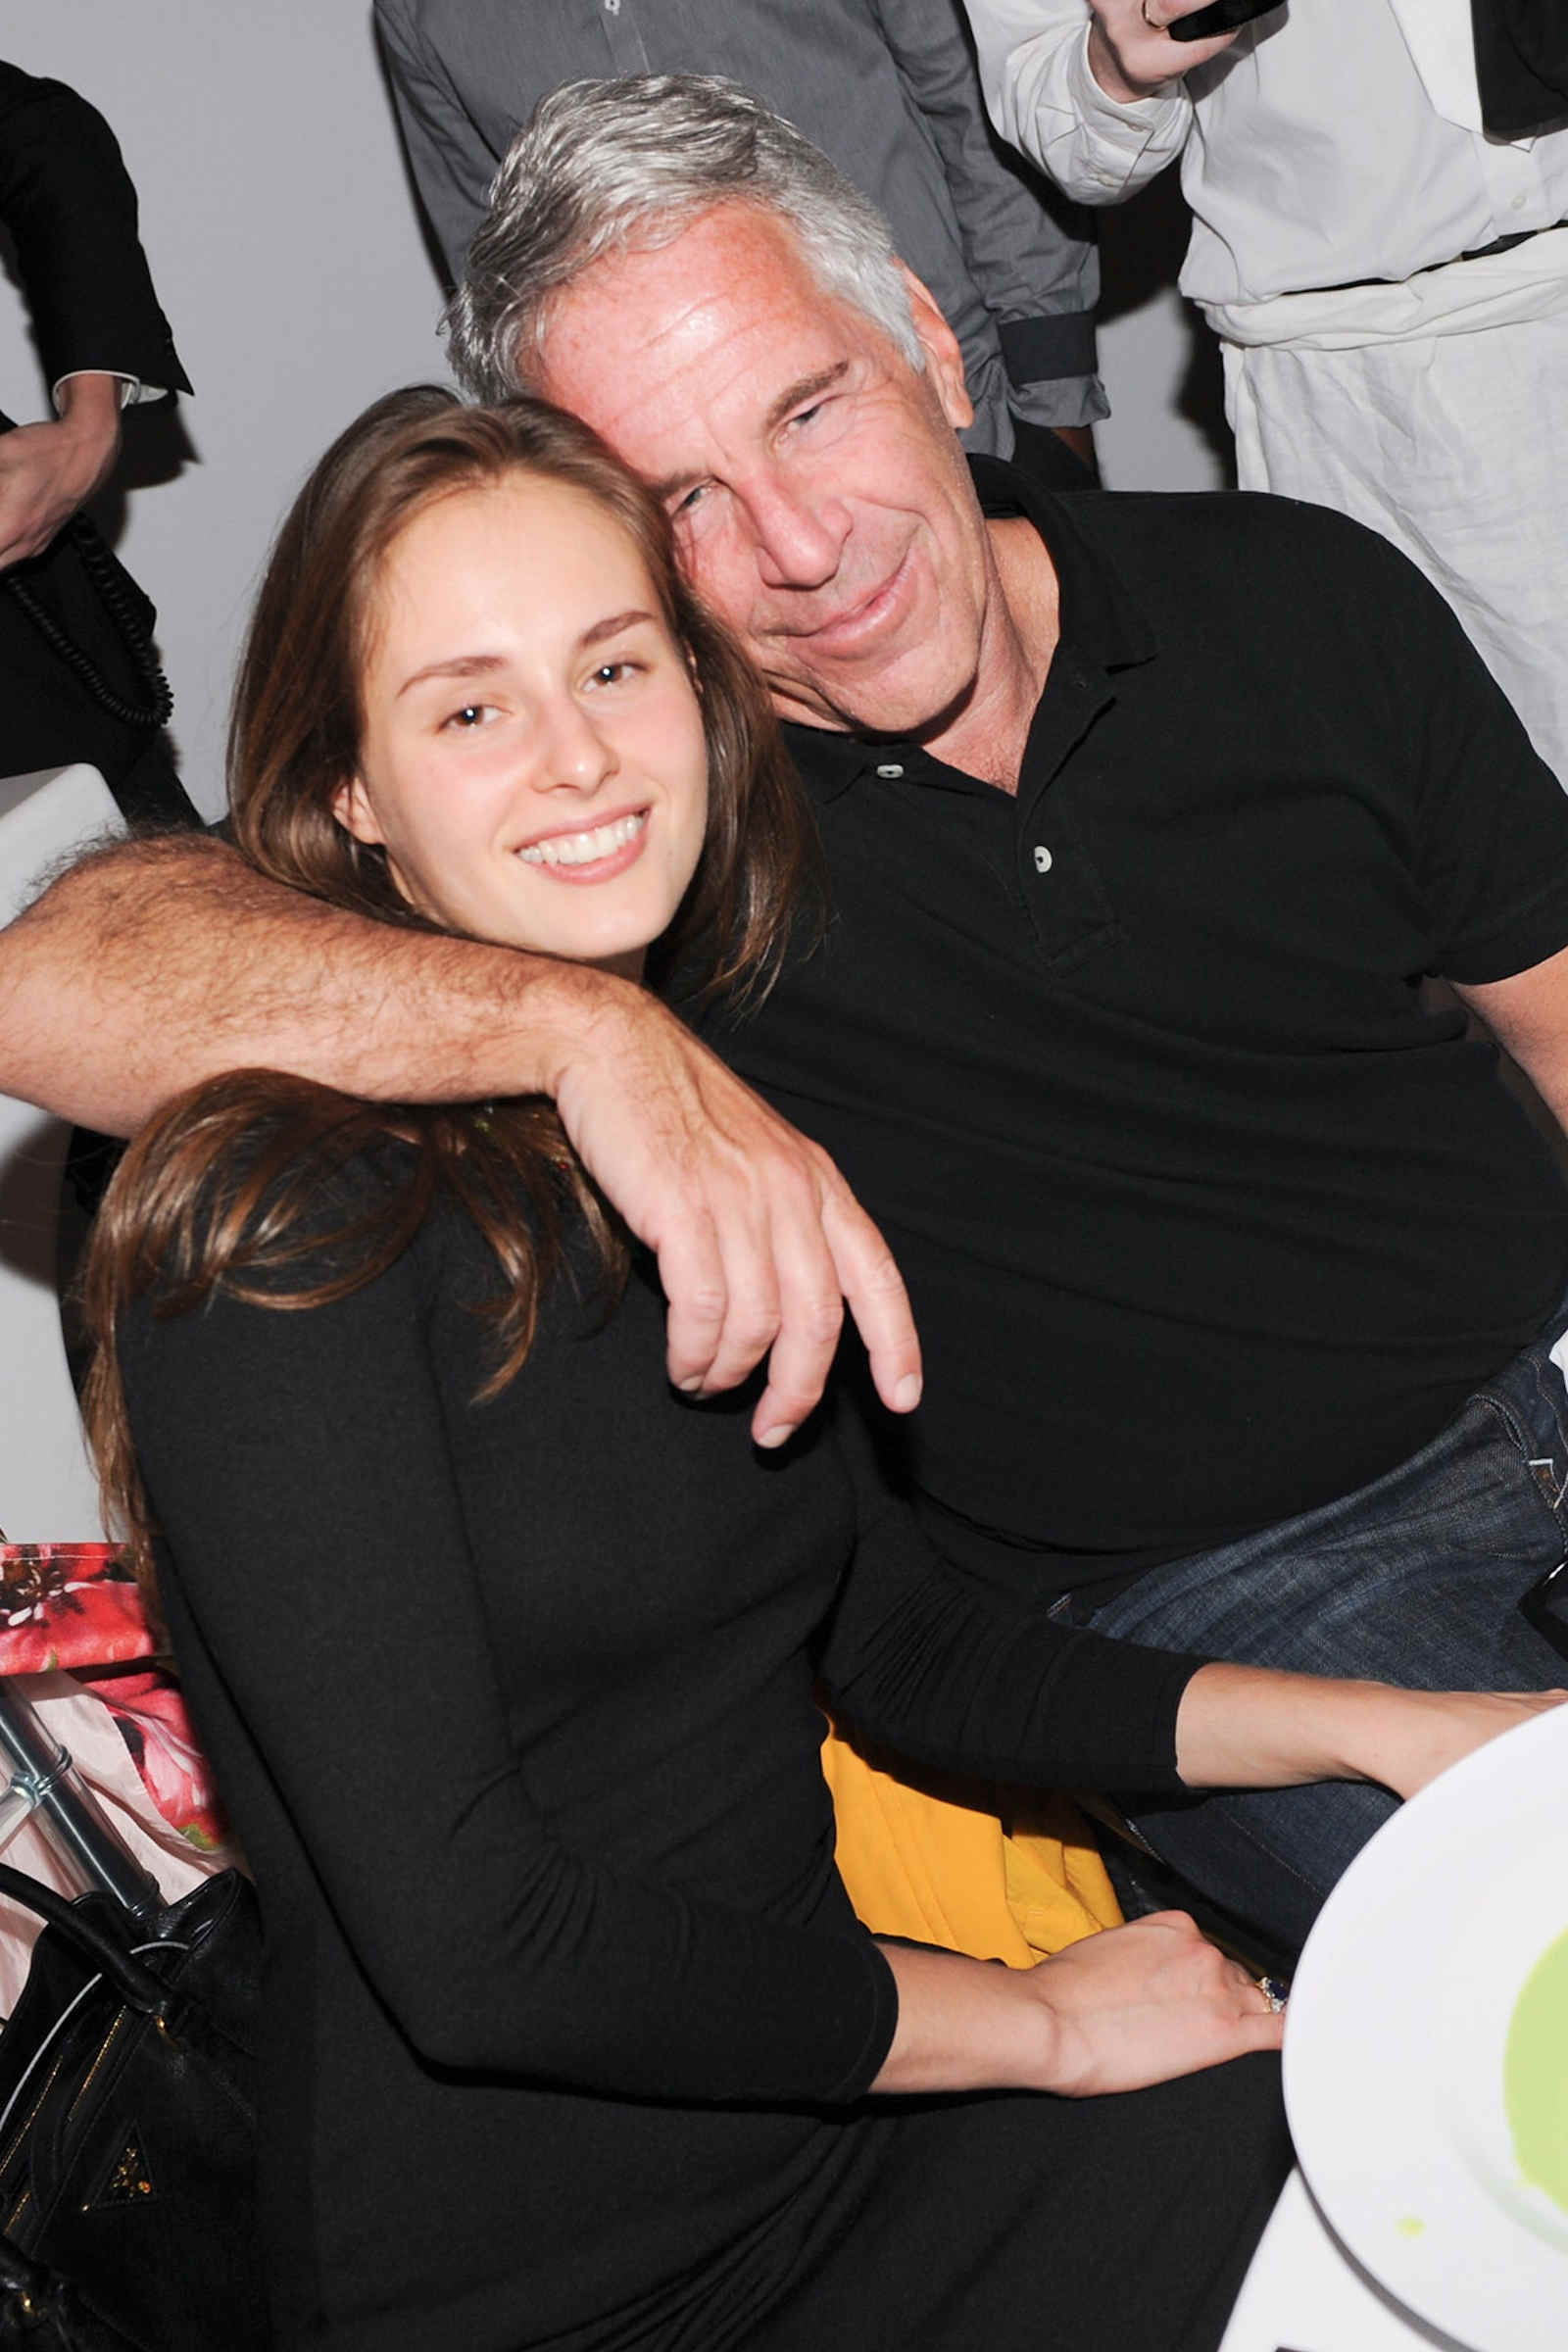 Jeffrey Epstein's secret girlfriend has shown her face for the first time since Epstein died last year. What has she and the rest of Epstein's family done?